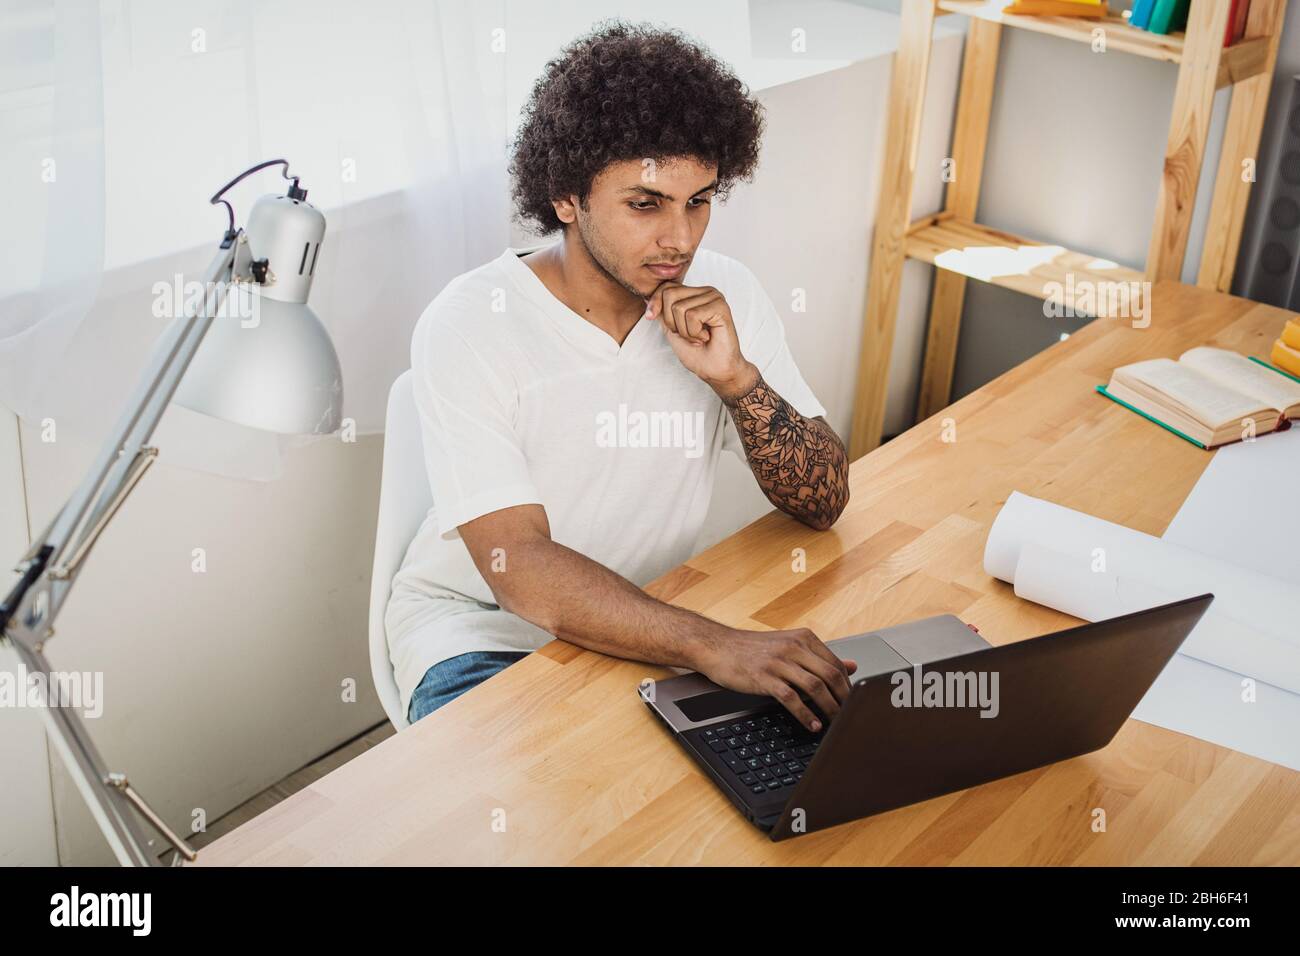 Study at home on laptop. Attractive man concentrated looking at the laptop and thinking. Stock Photo